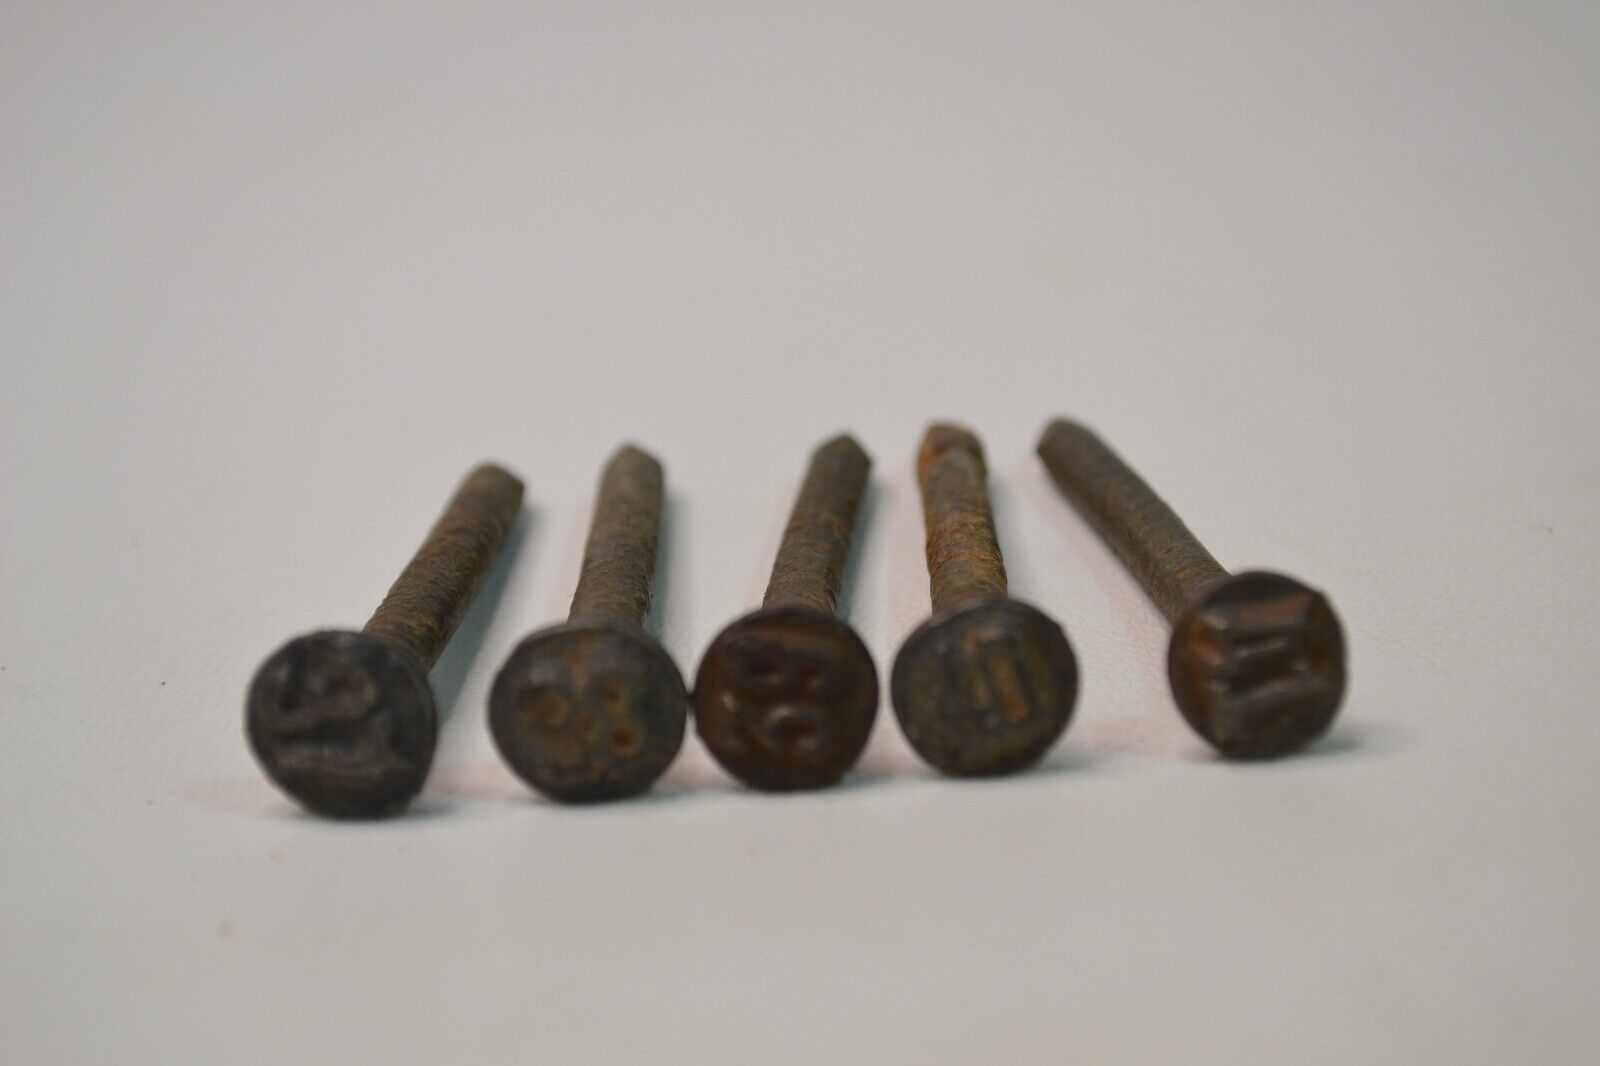 Lot of 5 Sequential Antique Railroad Date Spike Nails Train Tie Markers 37-41